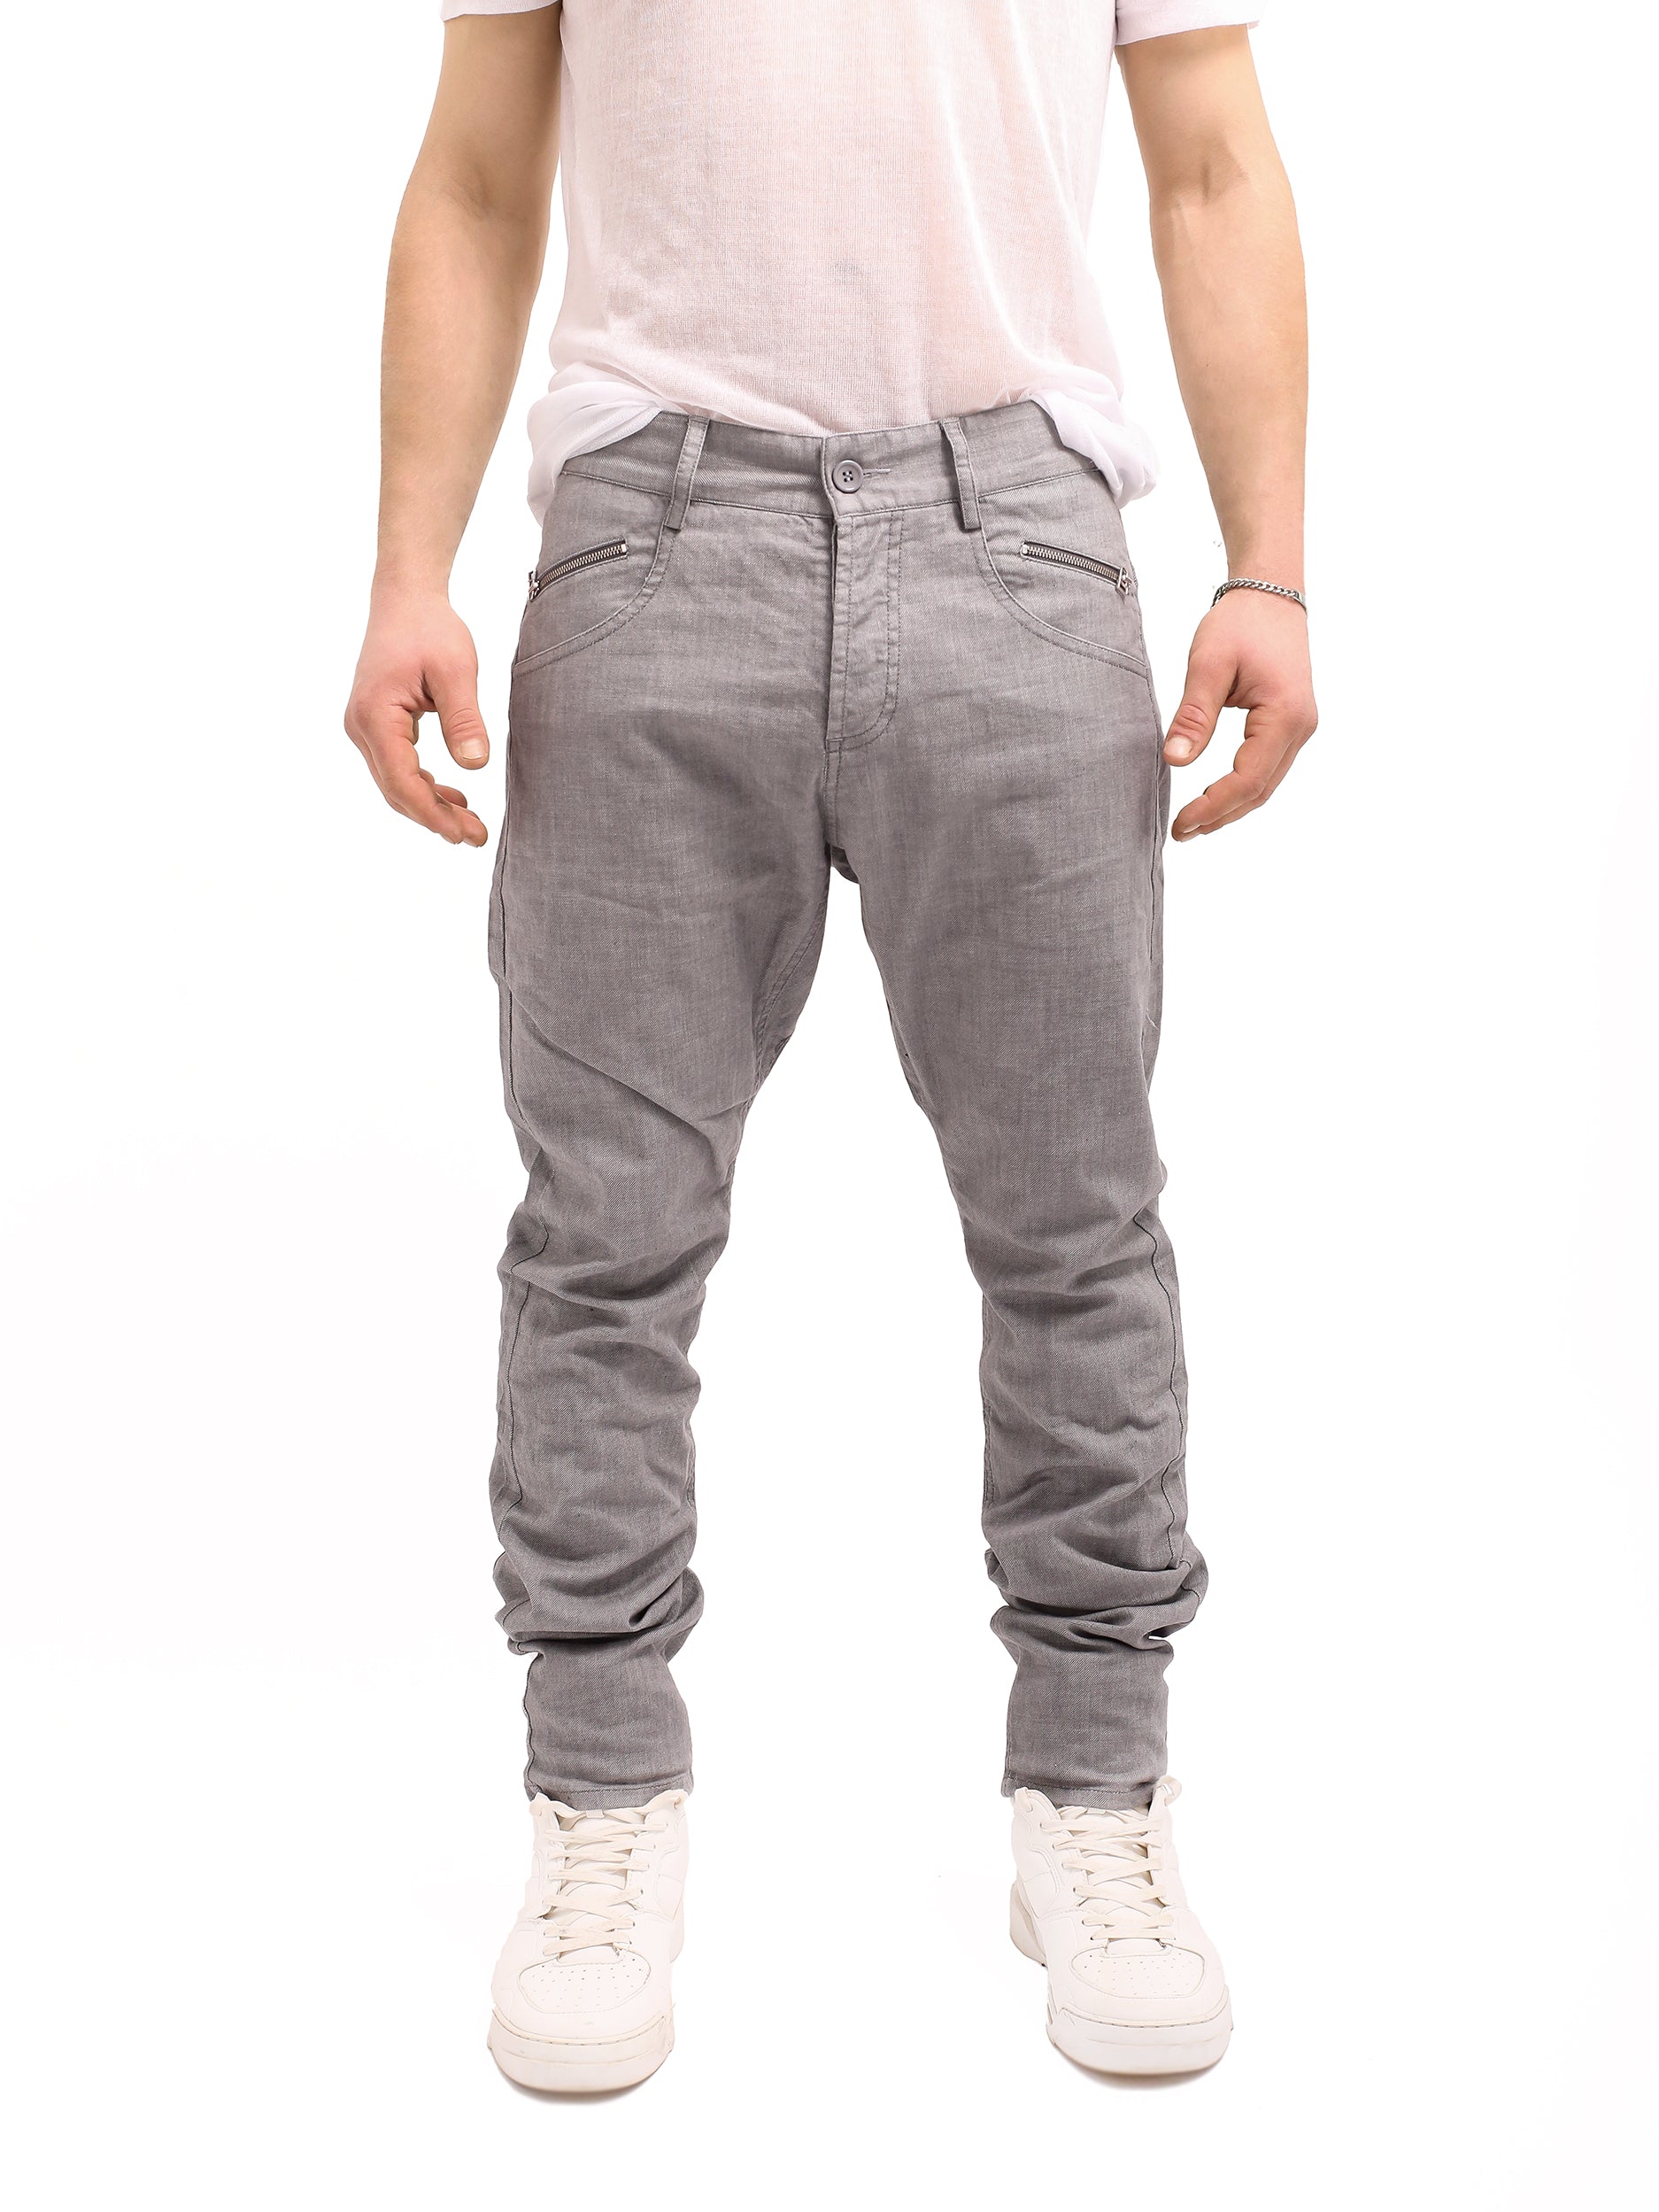 GREY STRAIGHT LEG JEANS WITH ZIP DETAIL